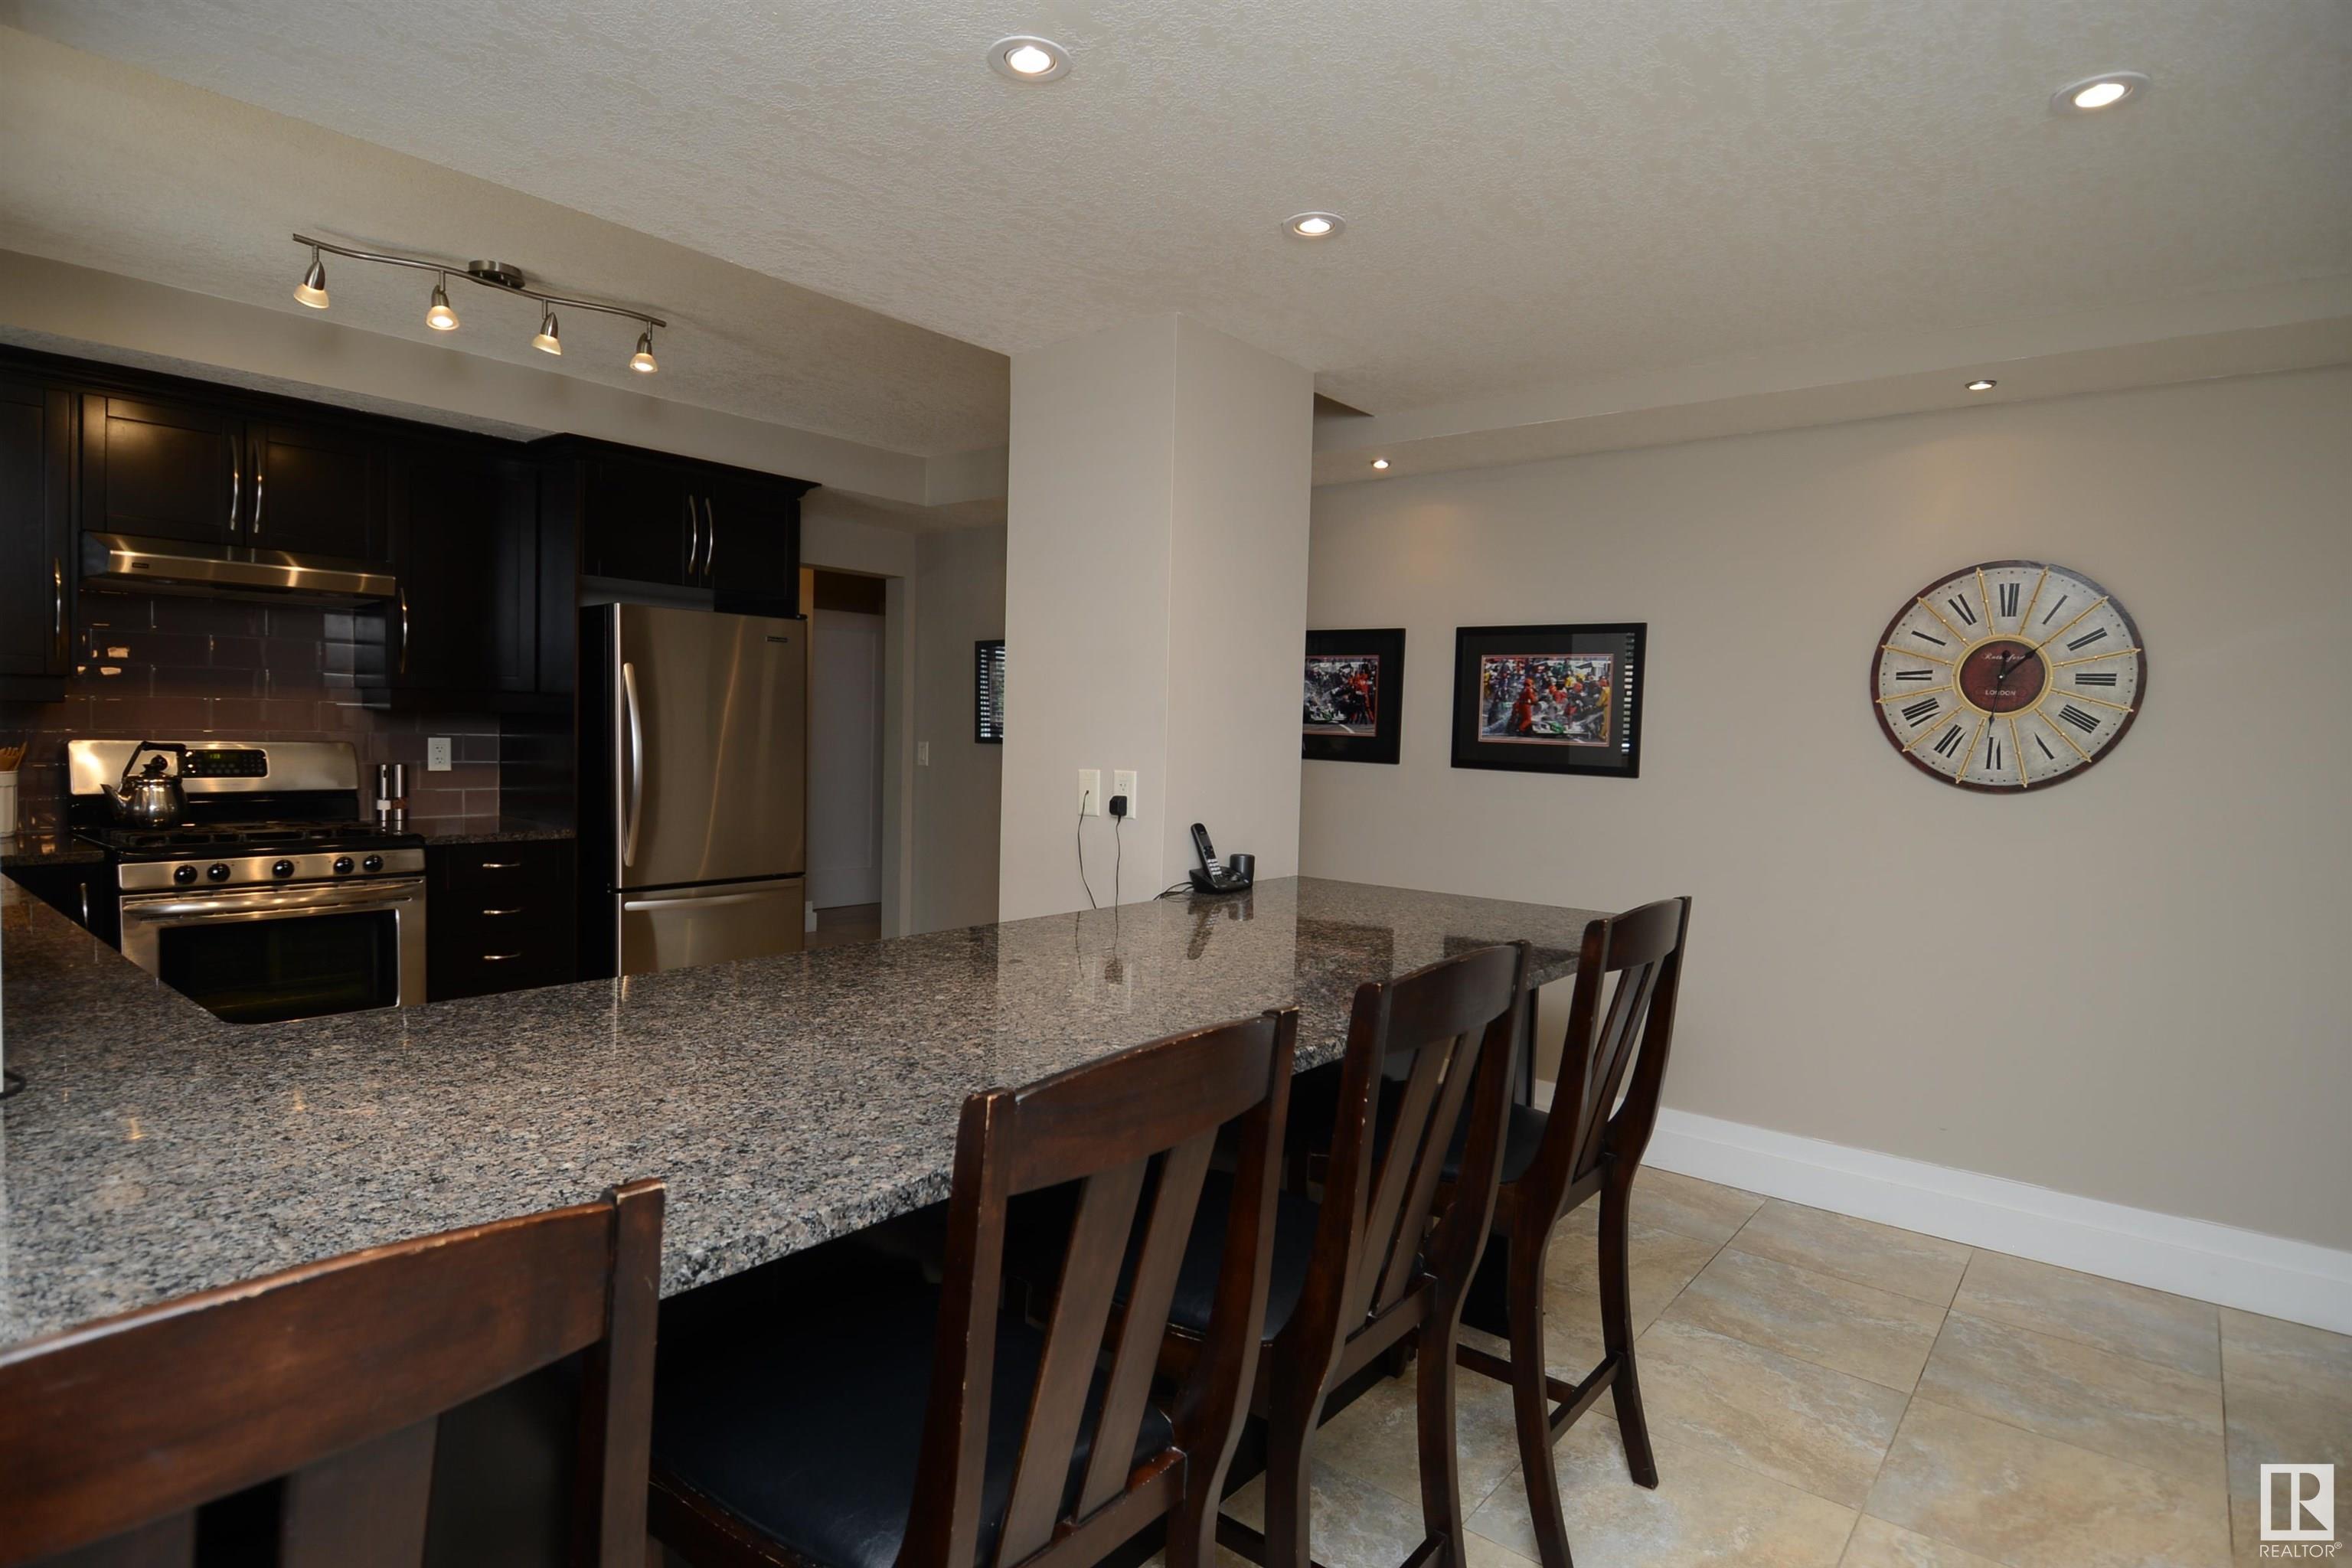      8907 140 ST NW NW , Edmonton,  ,T5R 0J1 ;  Listing Number: MLS E4329512